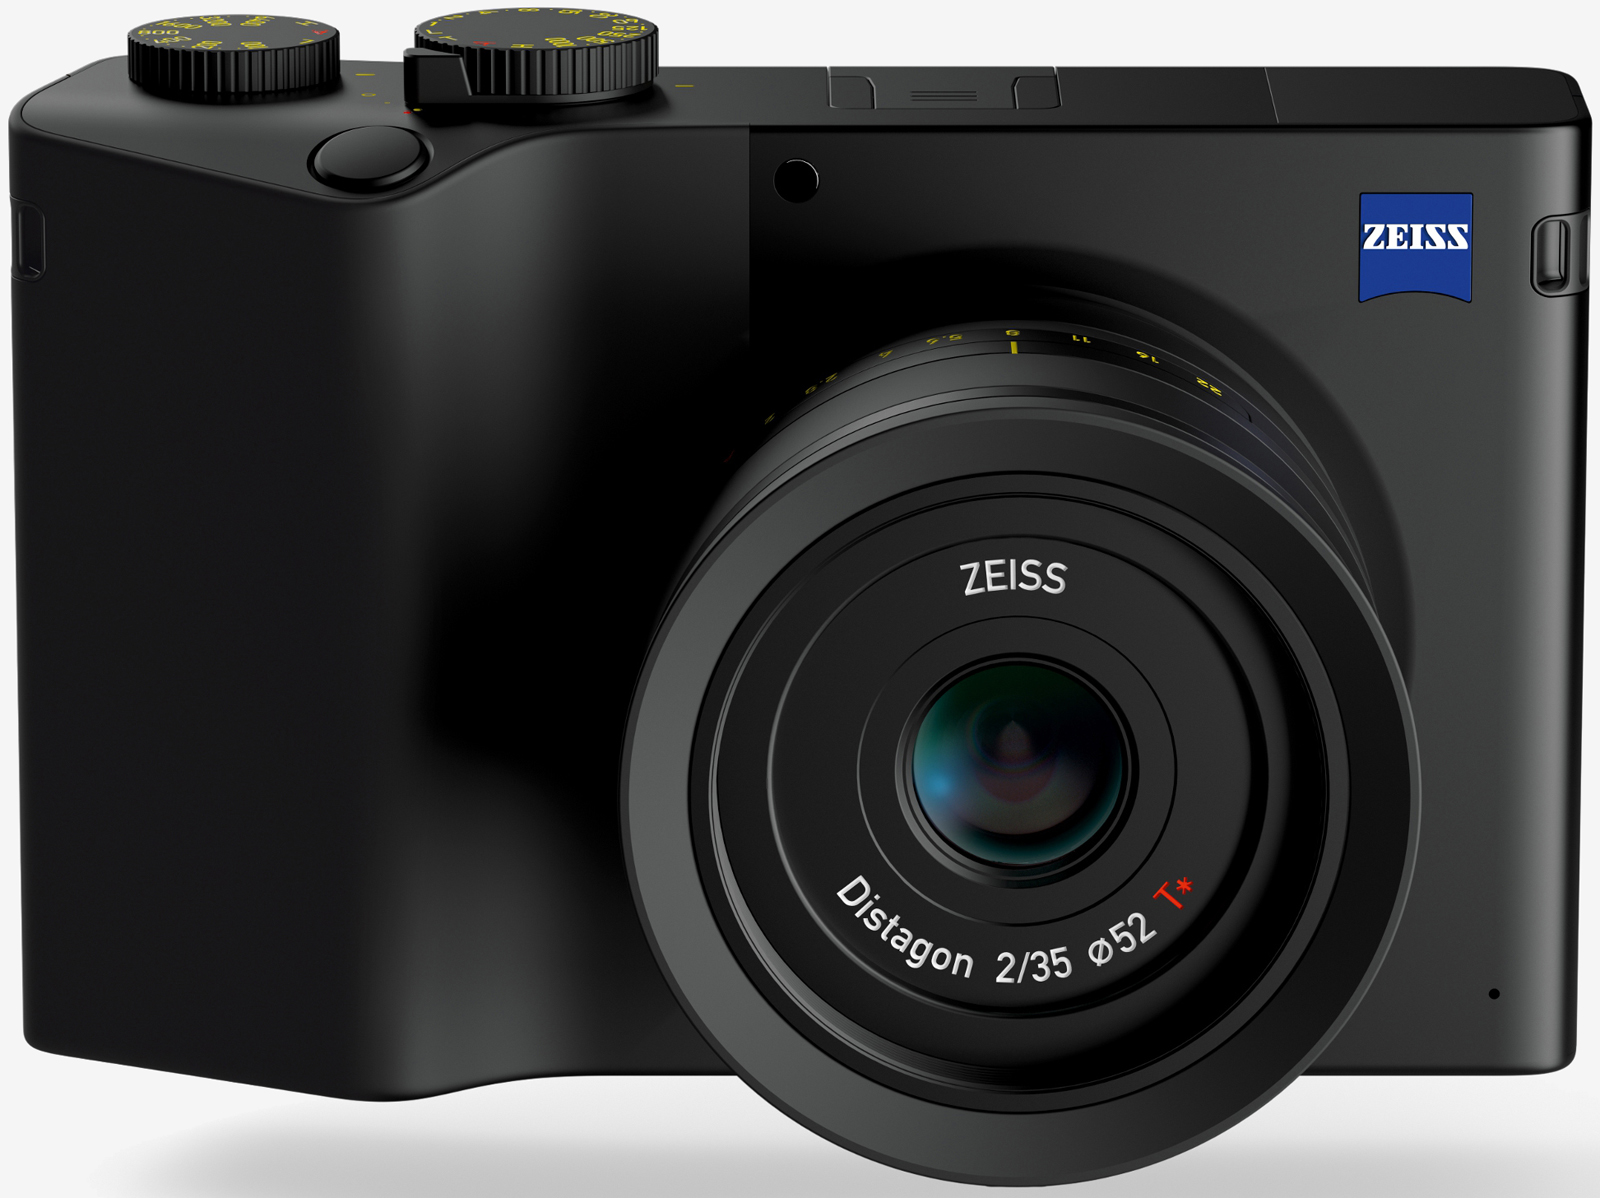 Zeiss' first full-frame, fixed-lens camera comes with Adobe Lightroom built in